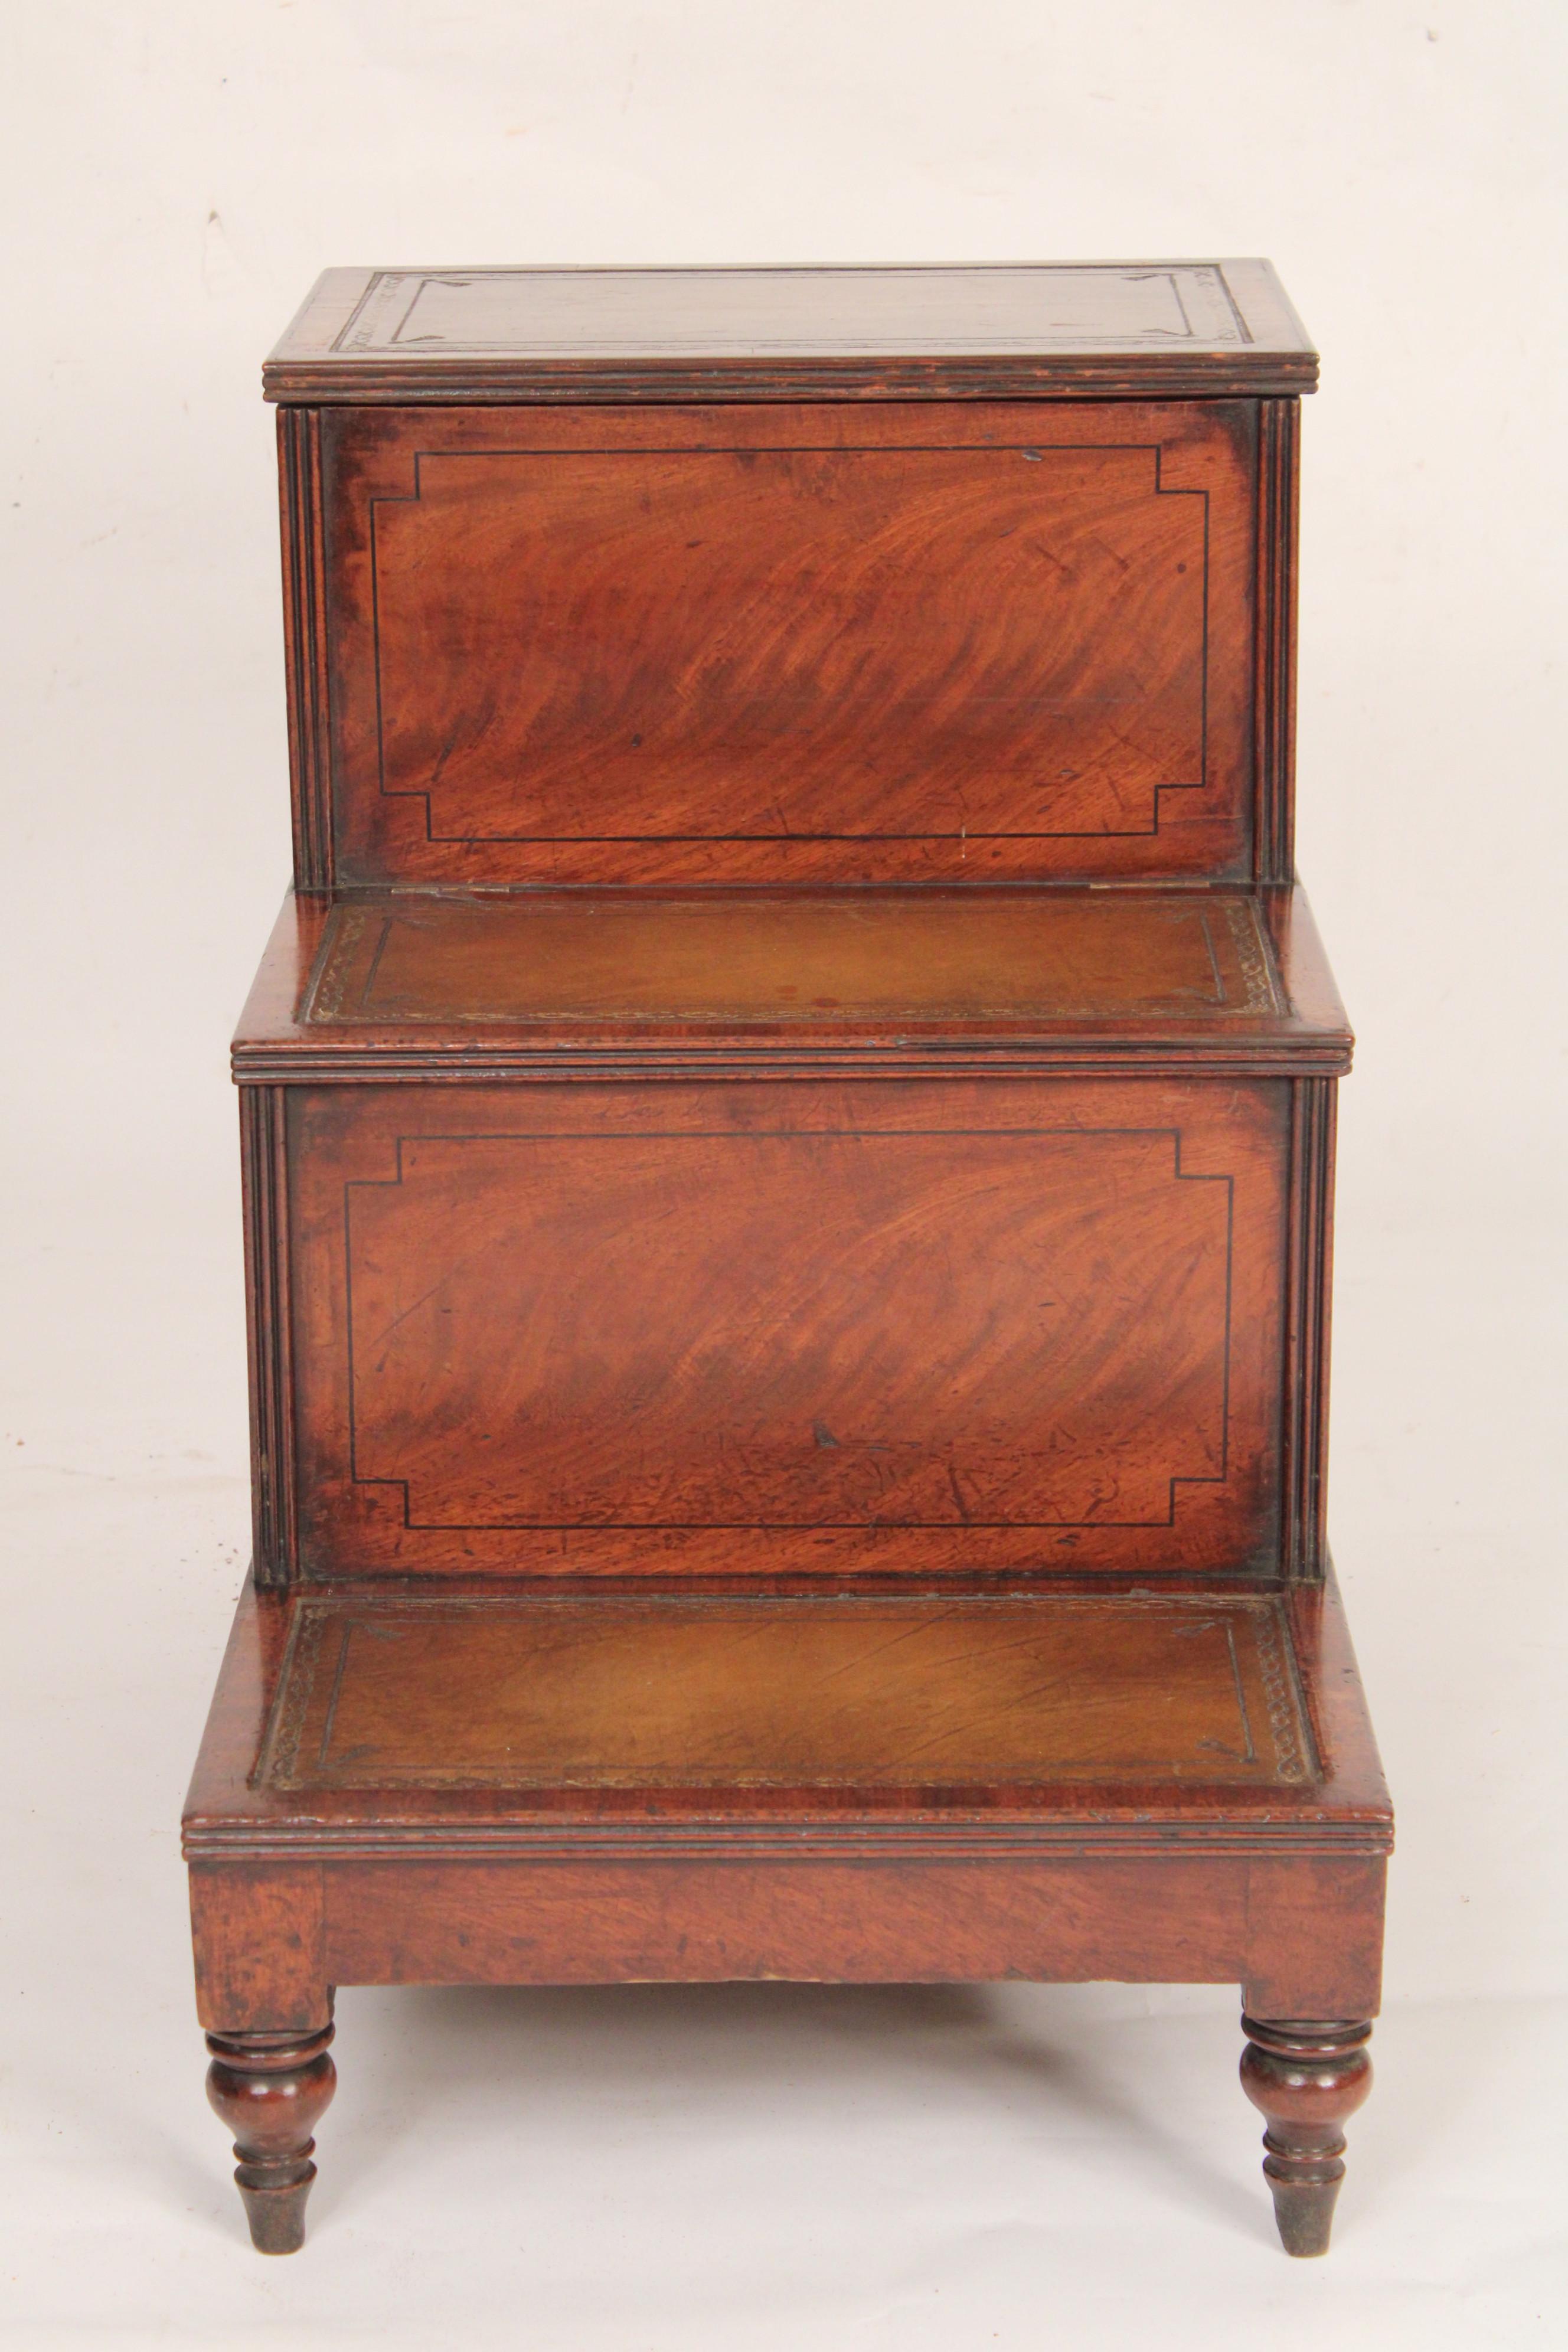 Antique George III style mahogany and oak bedside commode, 19th century. With tooled leather steps, nicely figured mahogany panels on the front and oak sides. The top step is hinged and opens for storage the second step pulls out as can be seen in